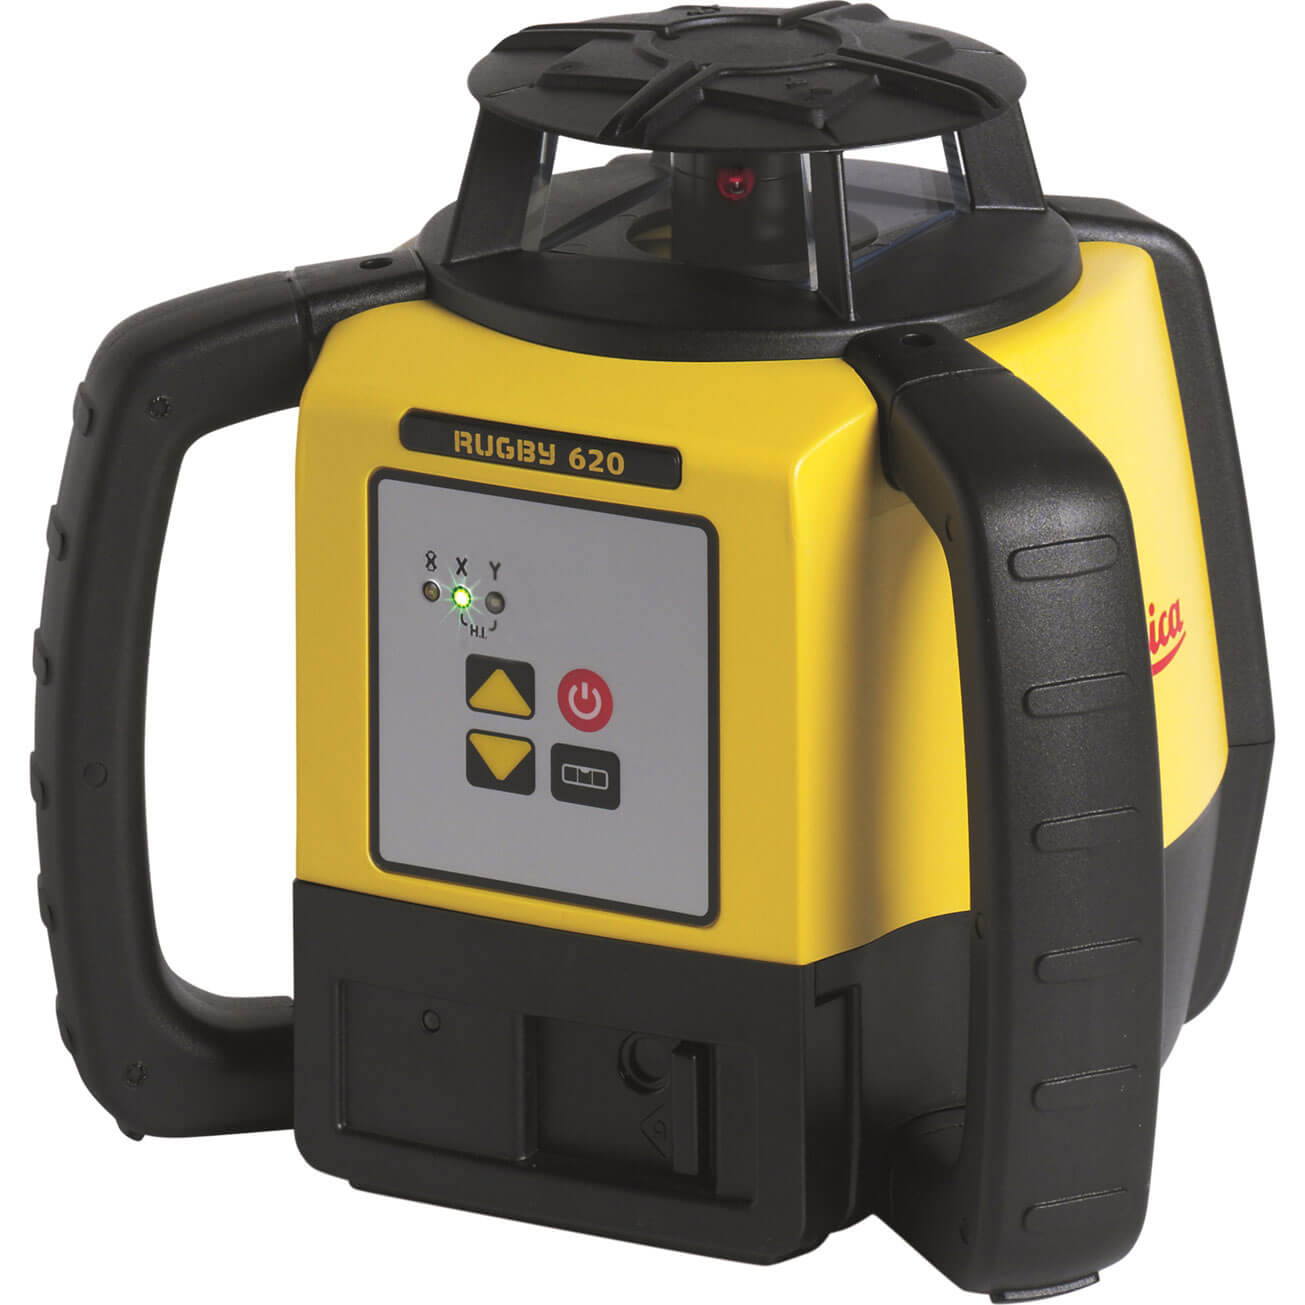 Photo of Leica Geosystems Rugby 620 Rotating Self Levelling Laser Level